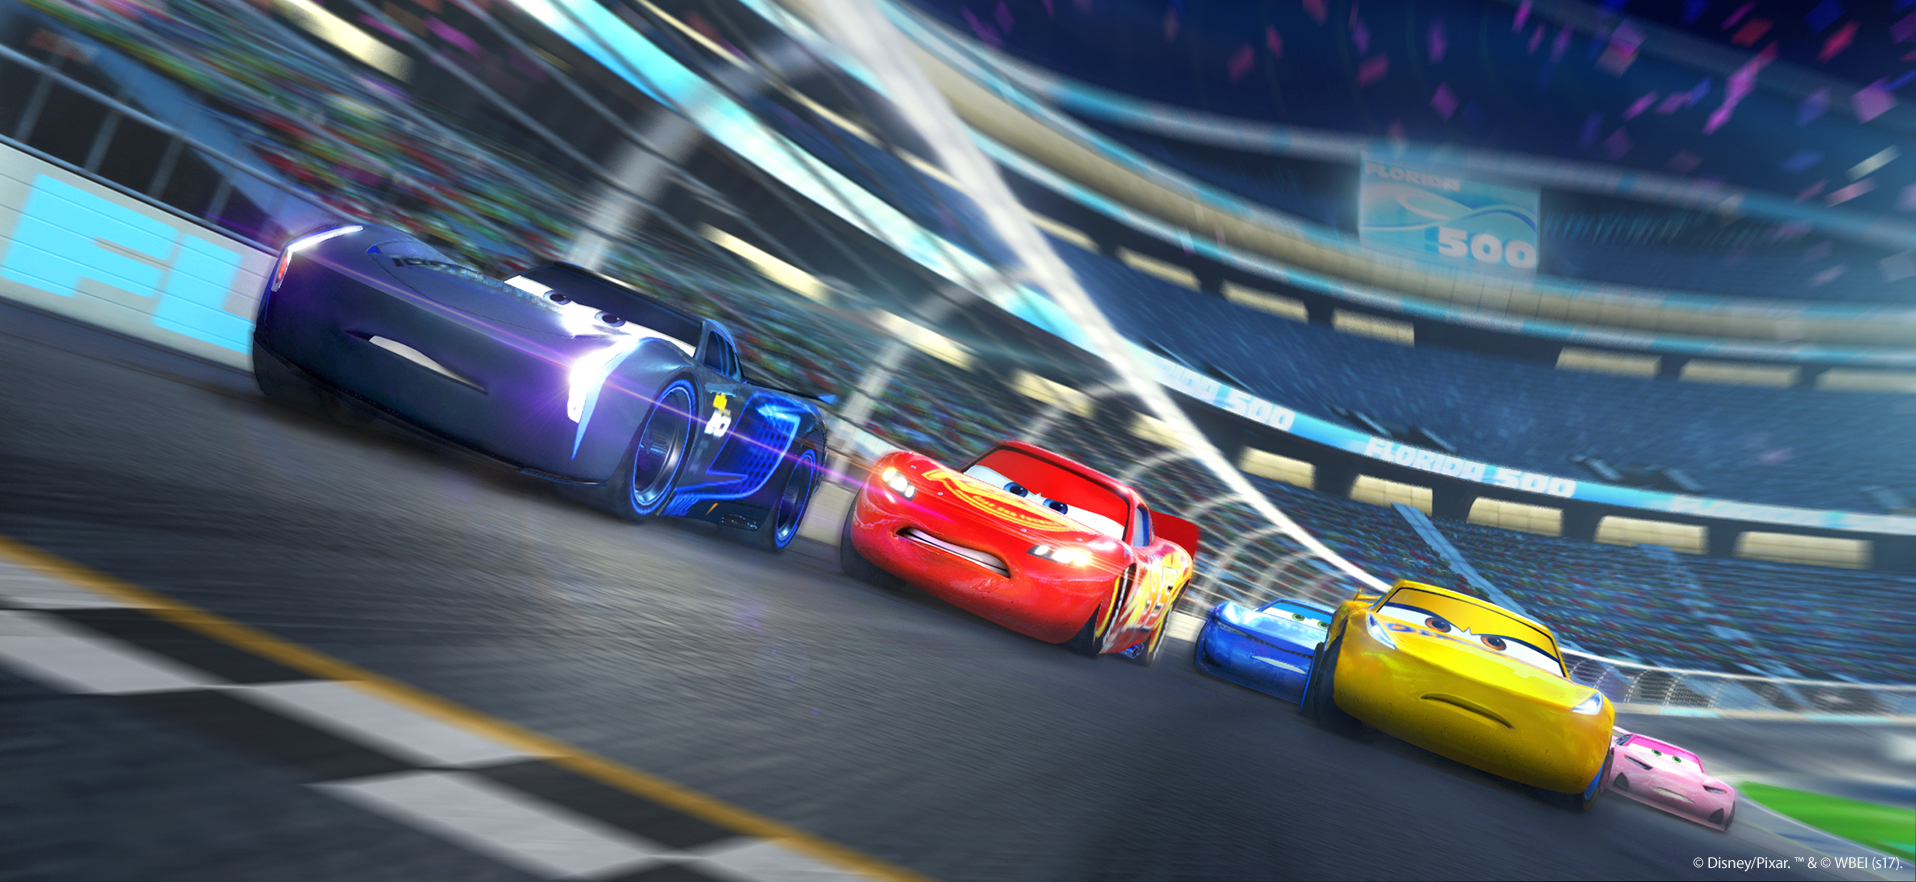 Warner Bros. Interactive Entertainment and Disney•Pixar Announce “Cars 3: Driven to Win”